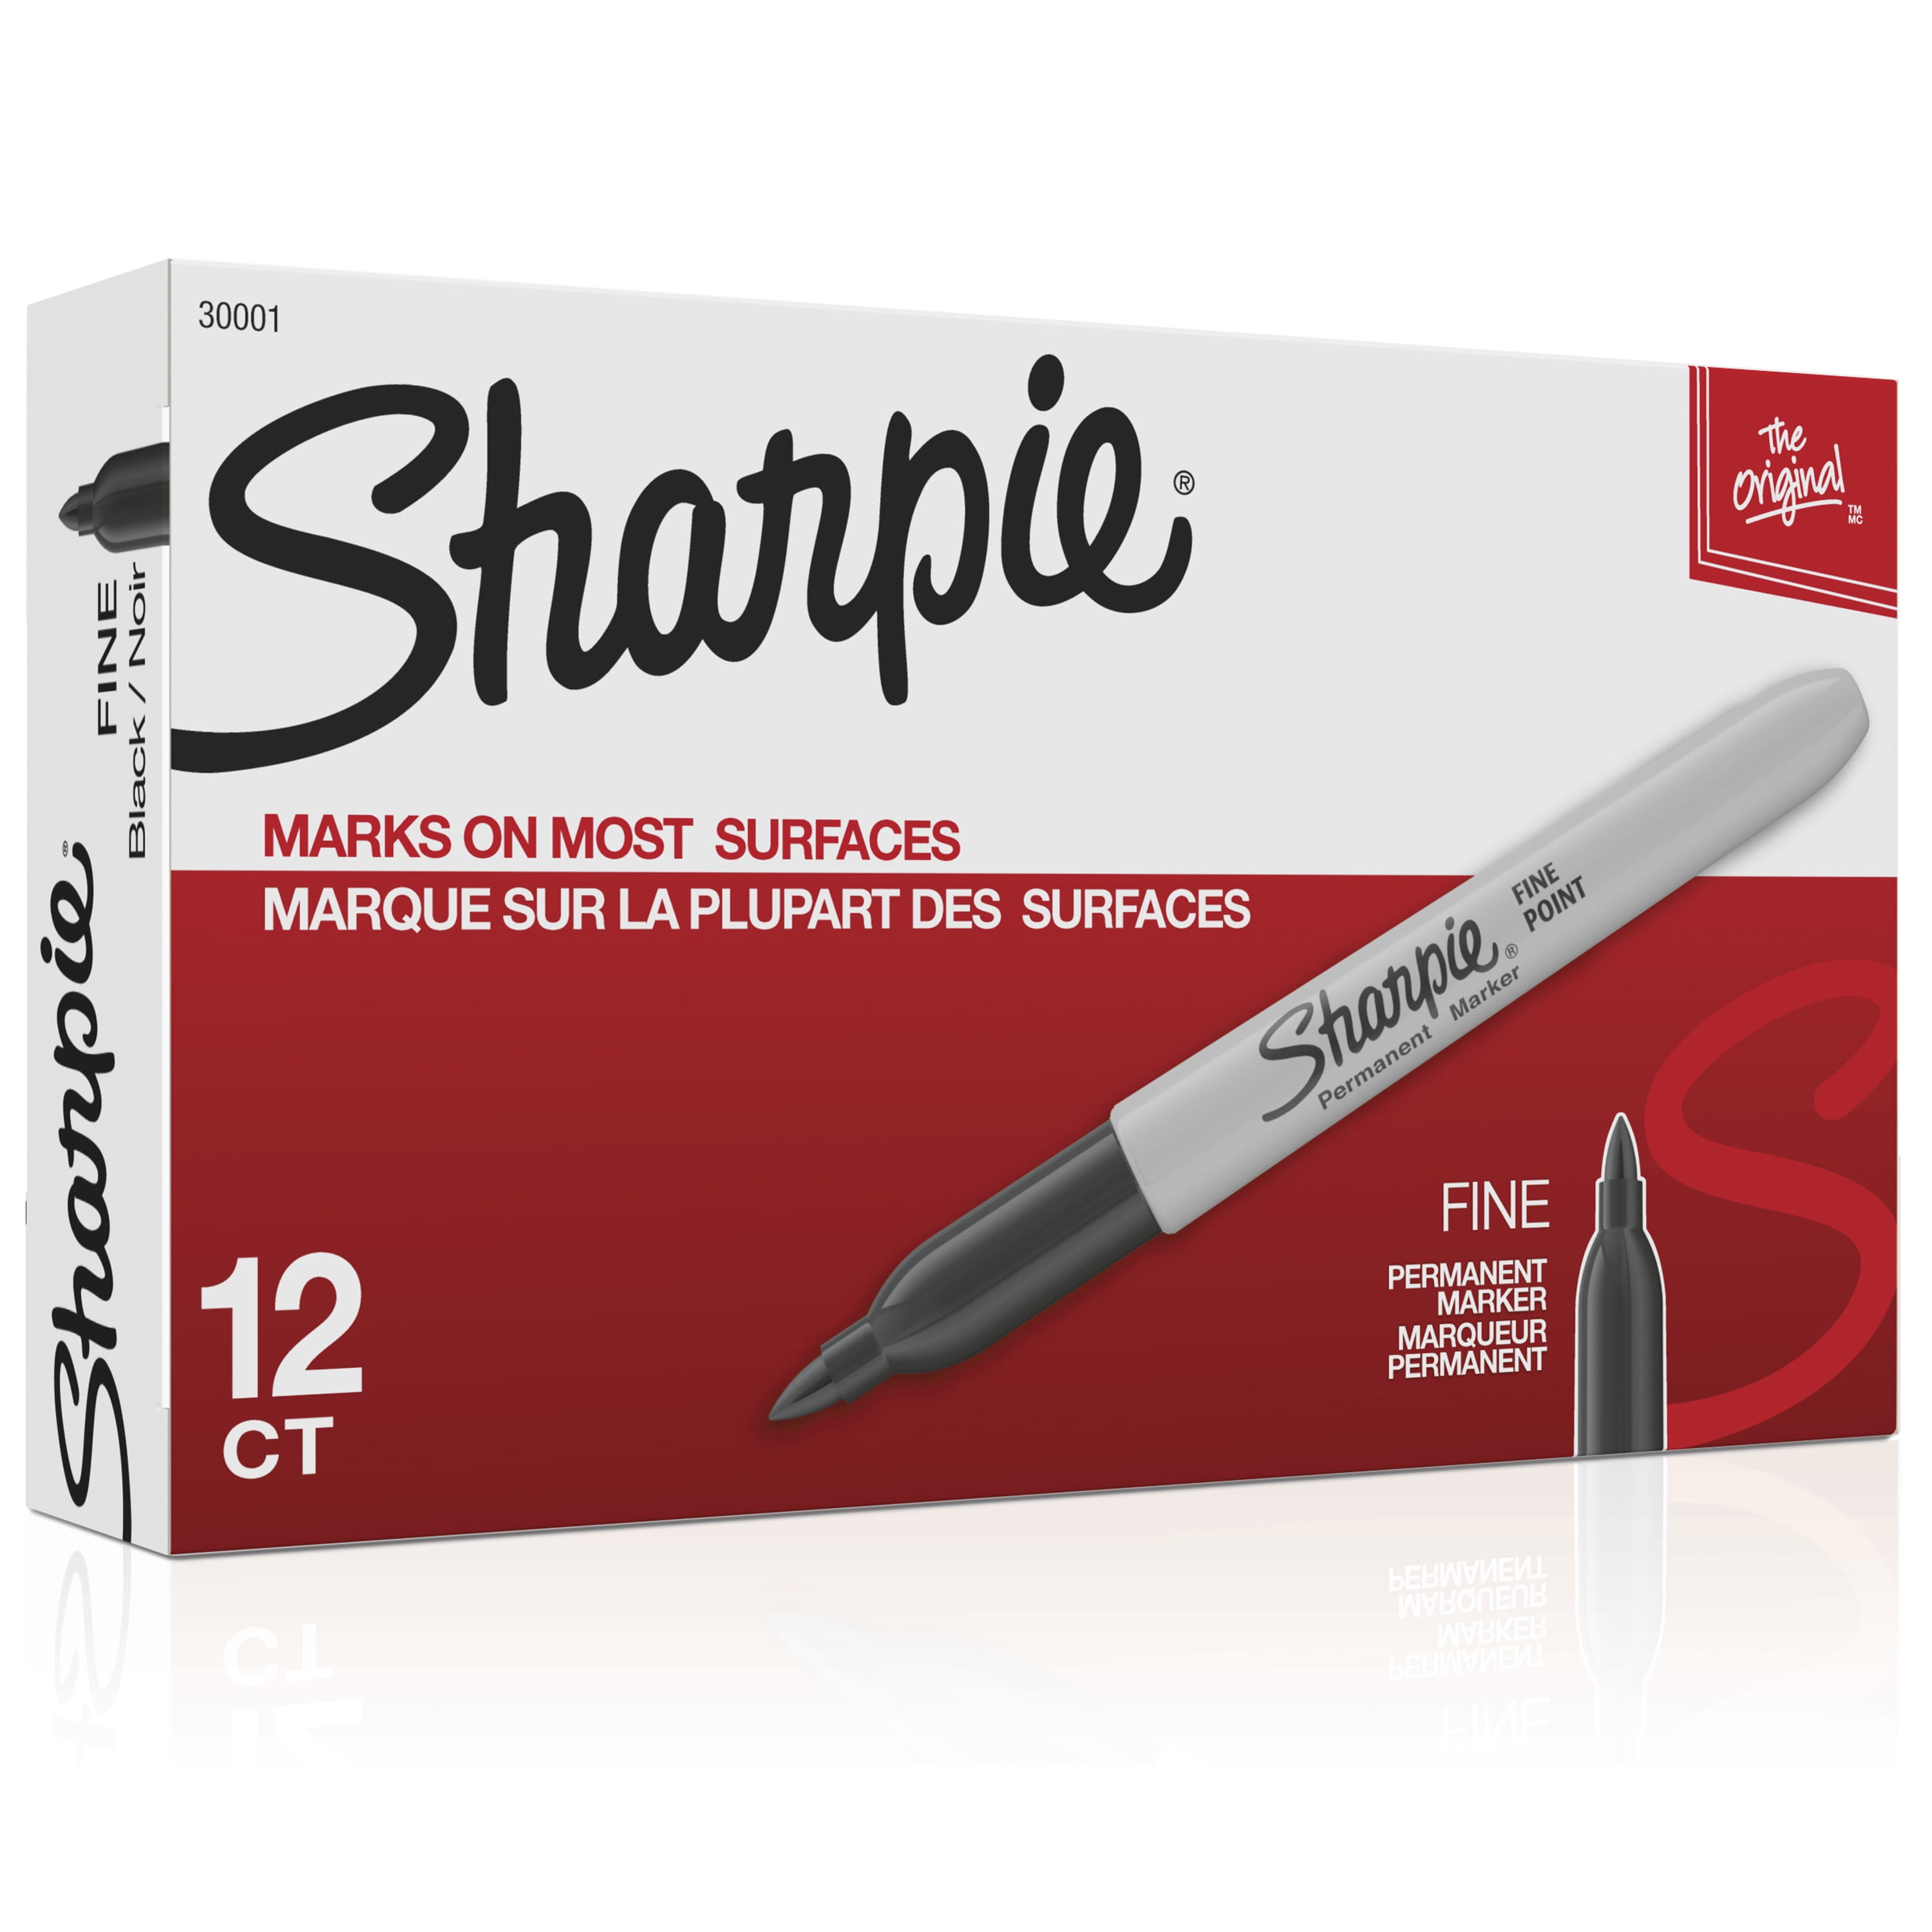 LOT OF 8 BRAND NEW FINE LINE SHARPIE FINE POINT PERMANENT MARKER,FREE SHIPPING 